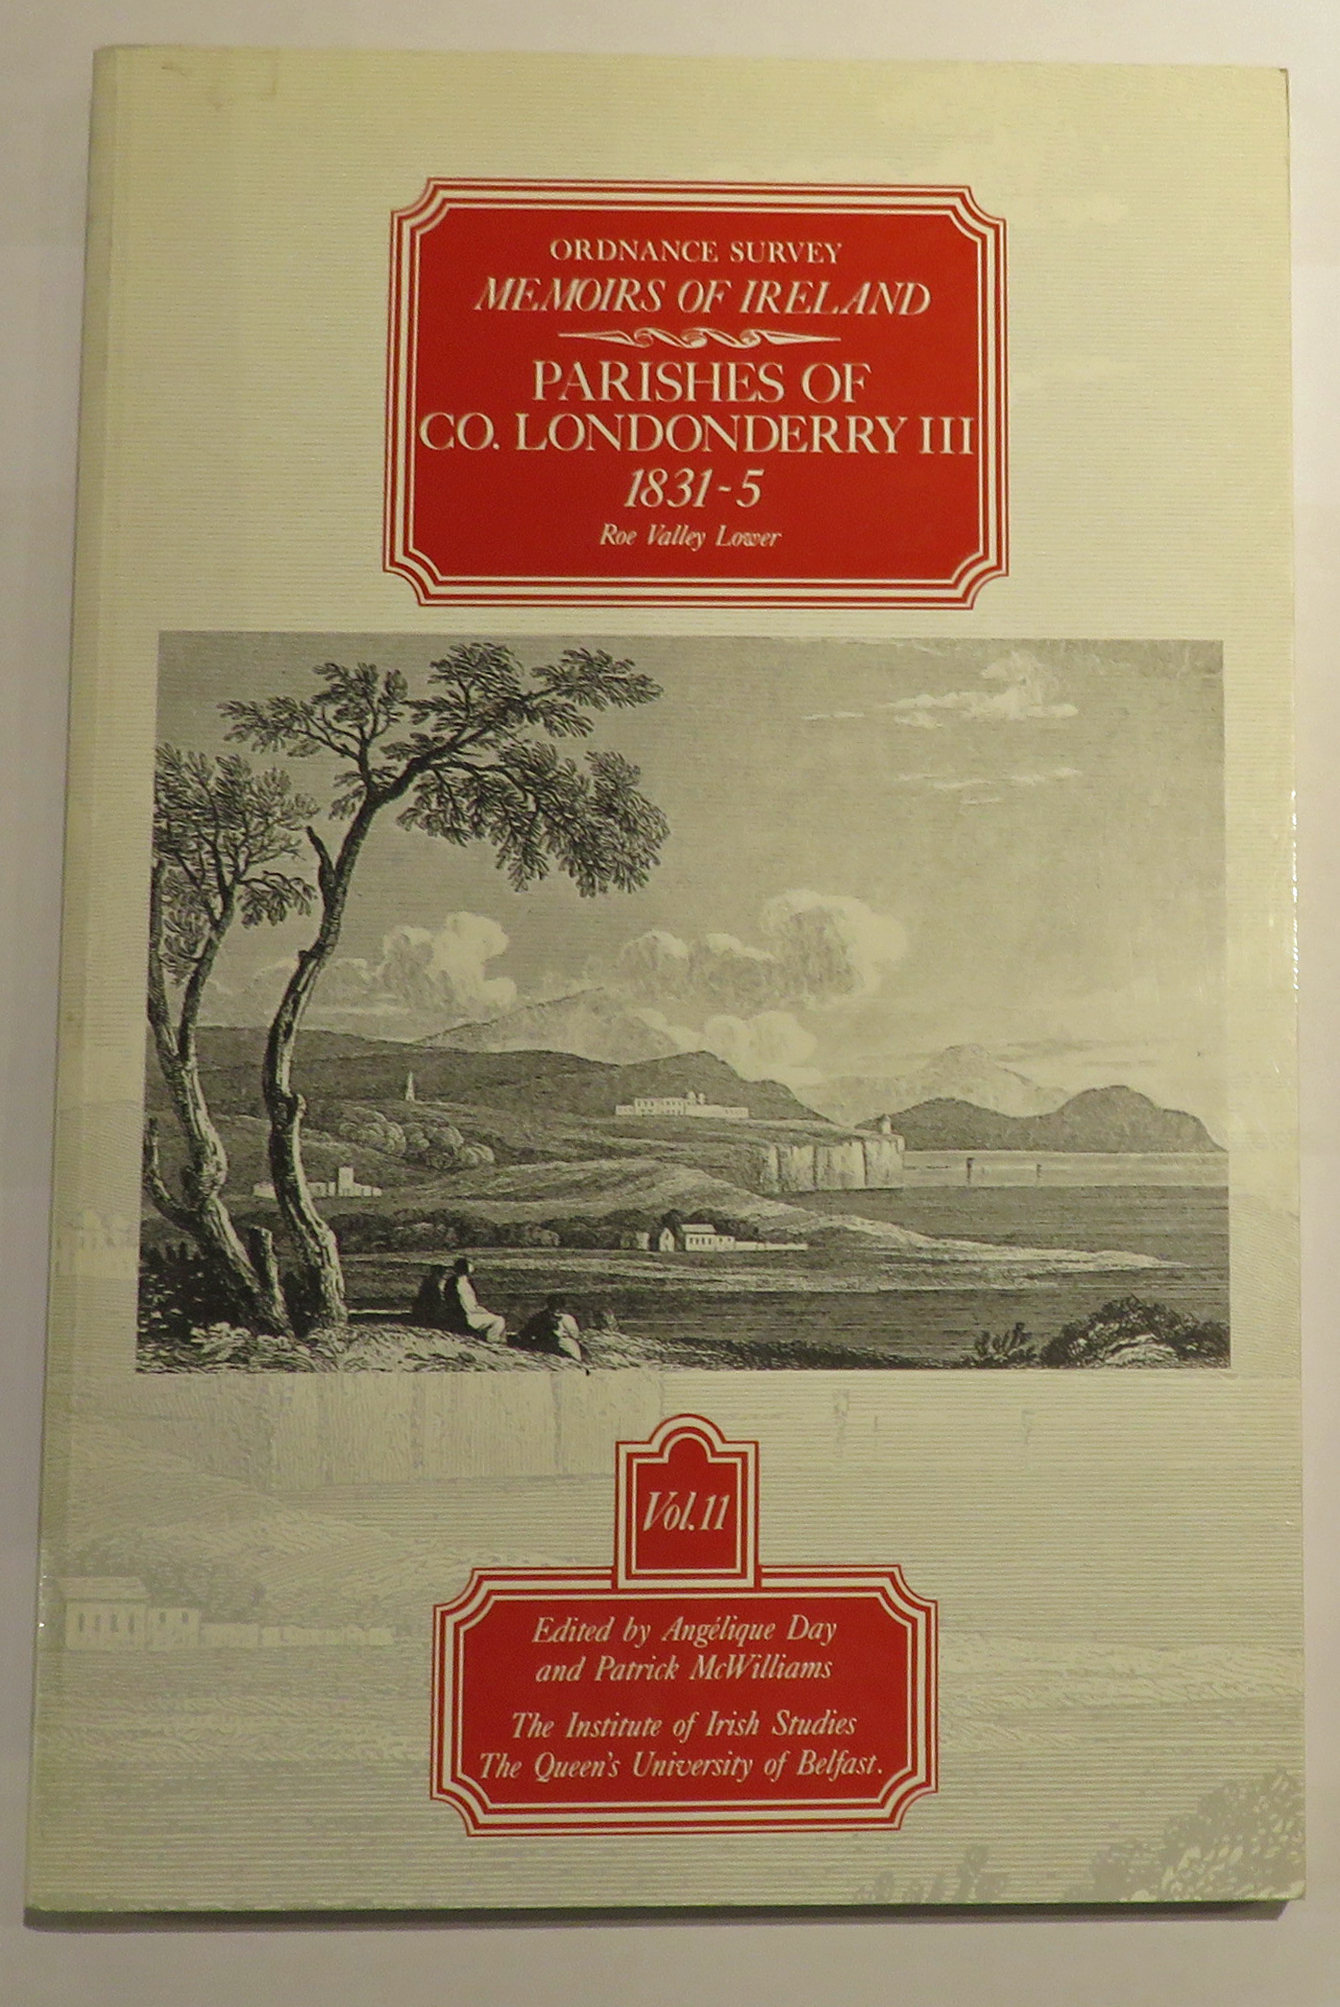 Ordnance Survey Memoirs Of Ireland Volume Eleven Parishes Of Co. Londonderry III 1831-5 Roe Valley Lower 